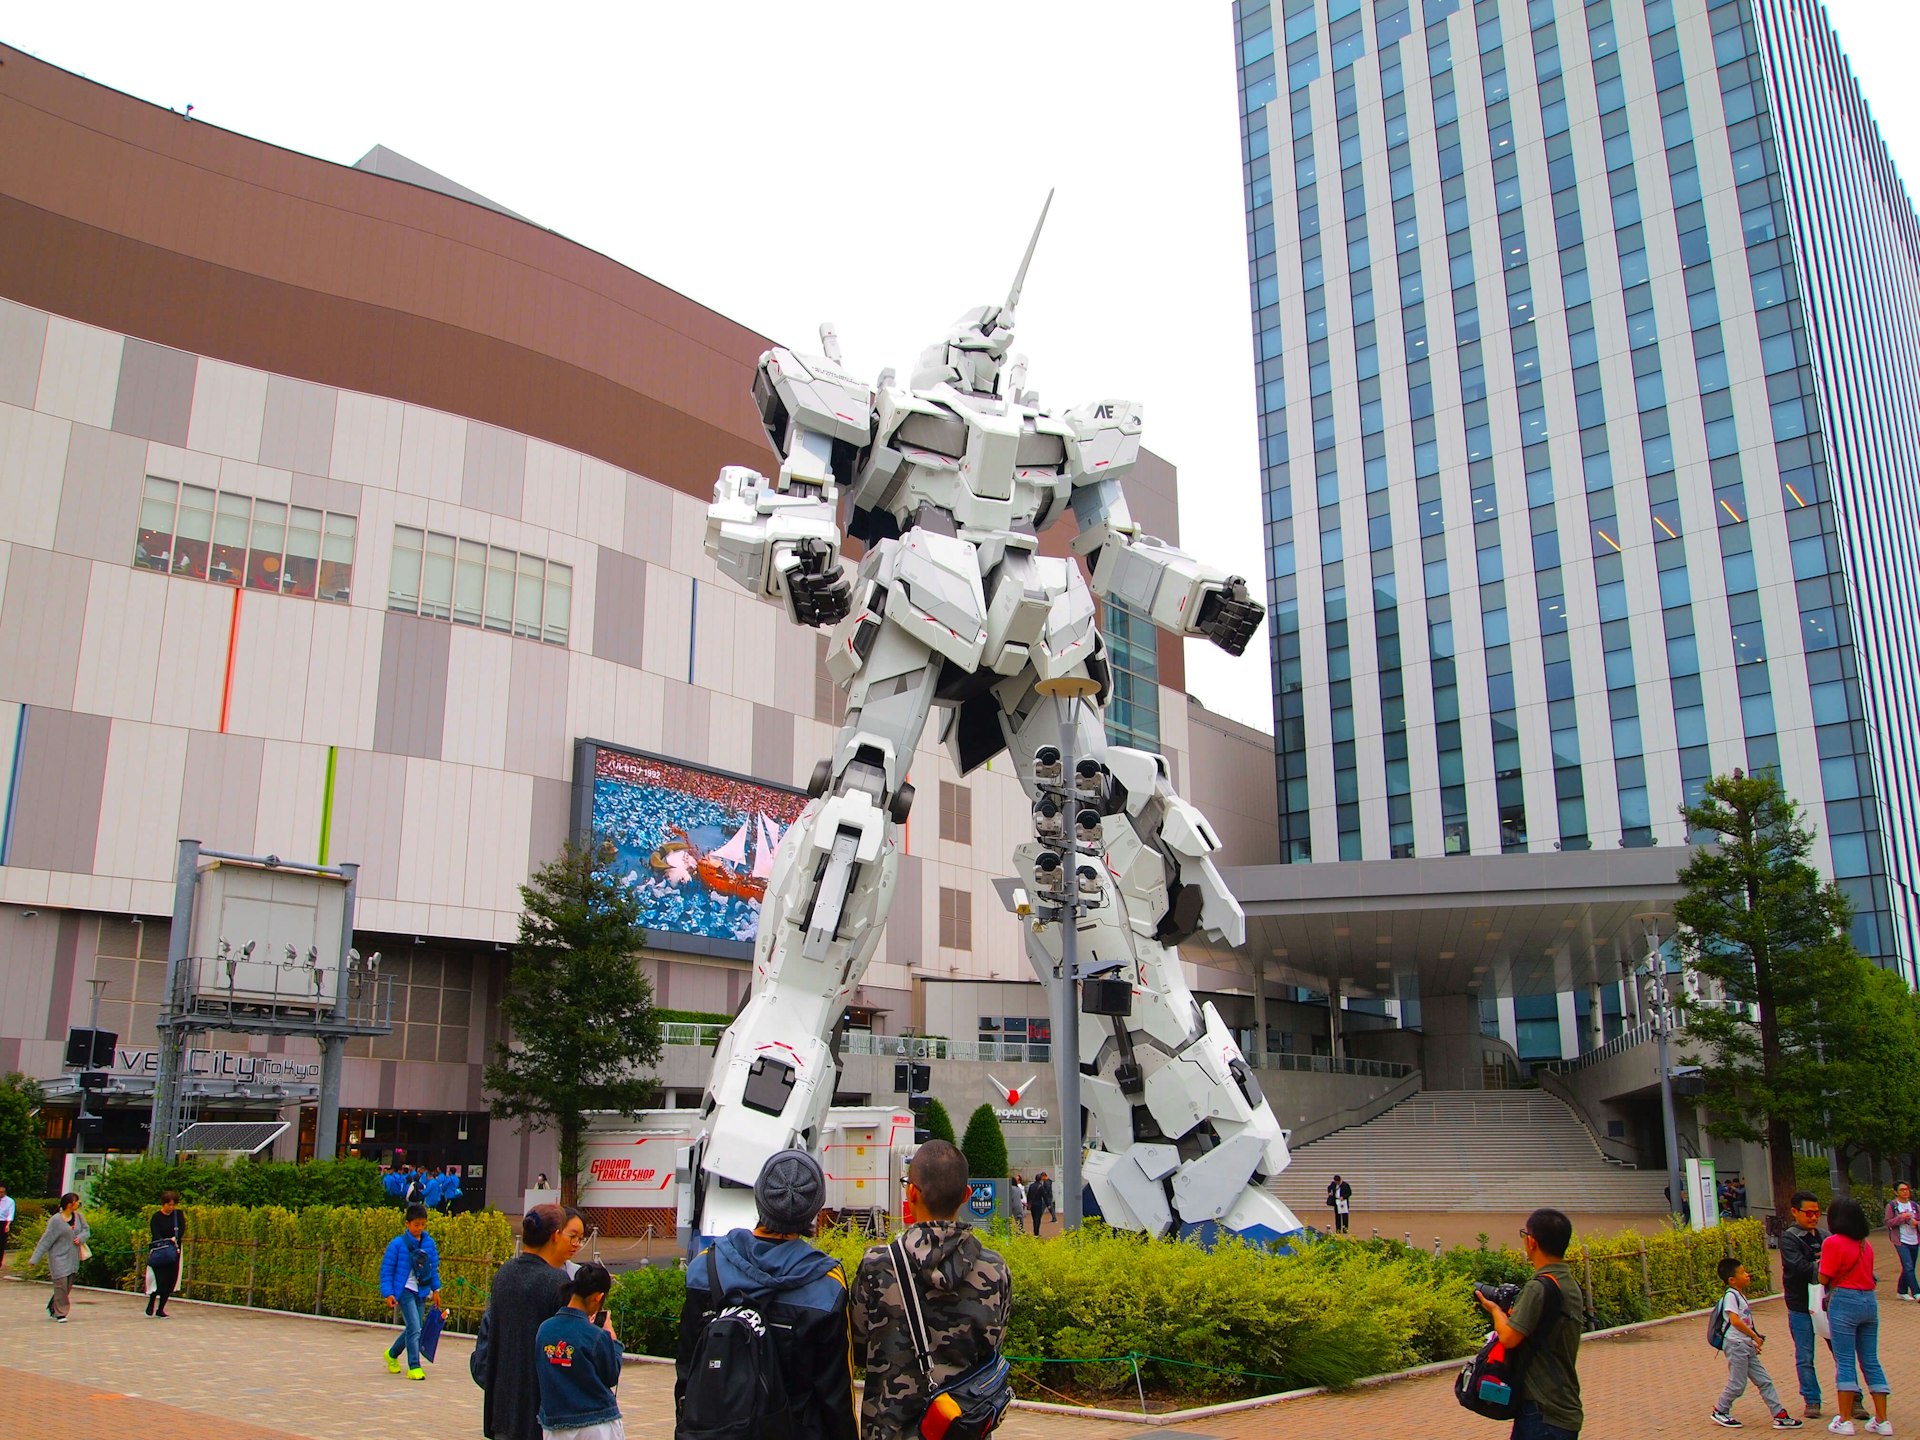 Children and families looking at the life sized unicorn Gundam Statue, a fictional robot from a famous Japanese anime series